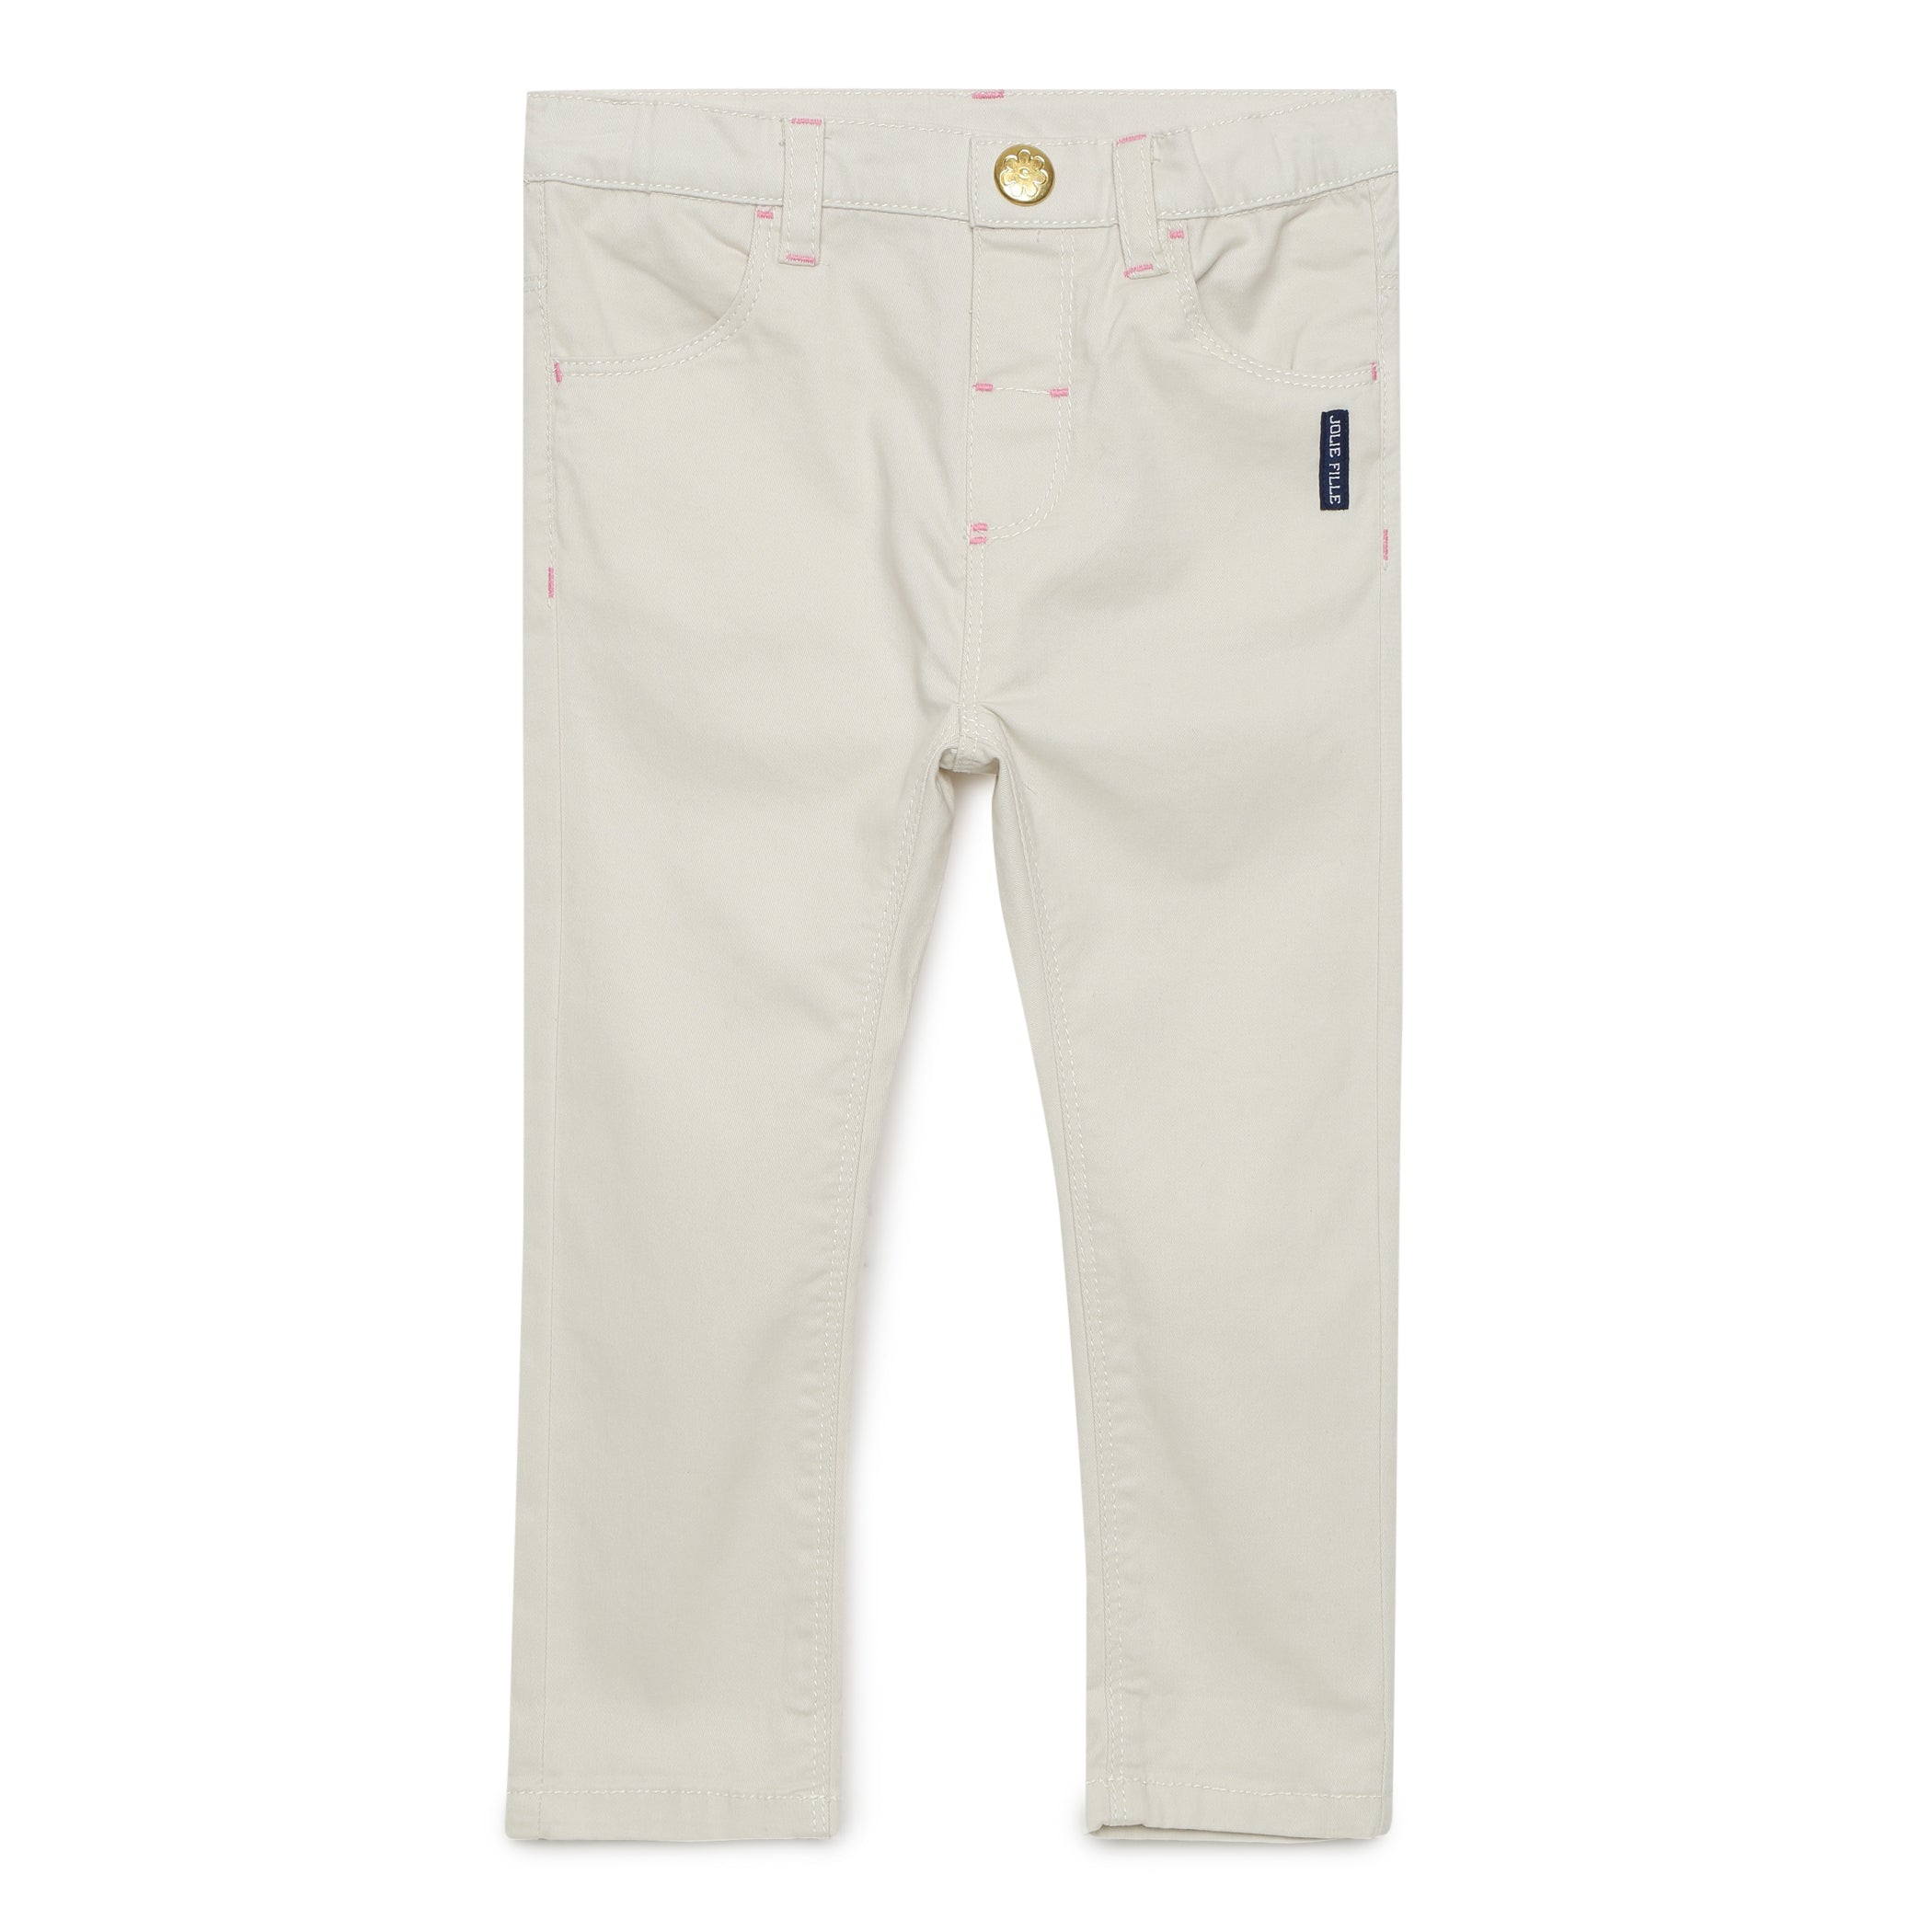 Baby Girls Solid Twill Pant